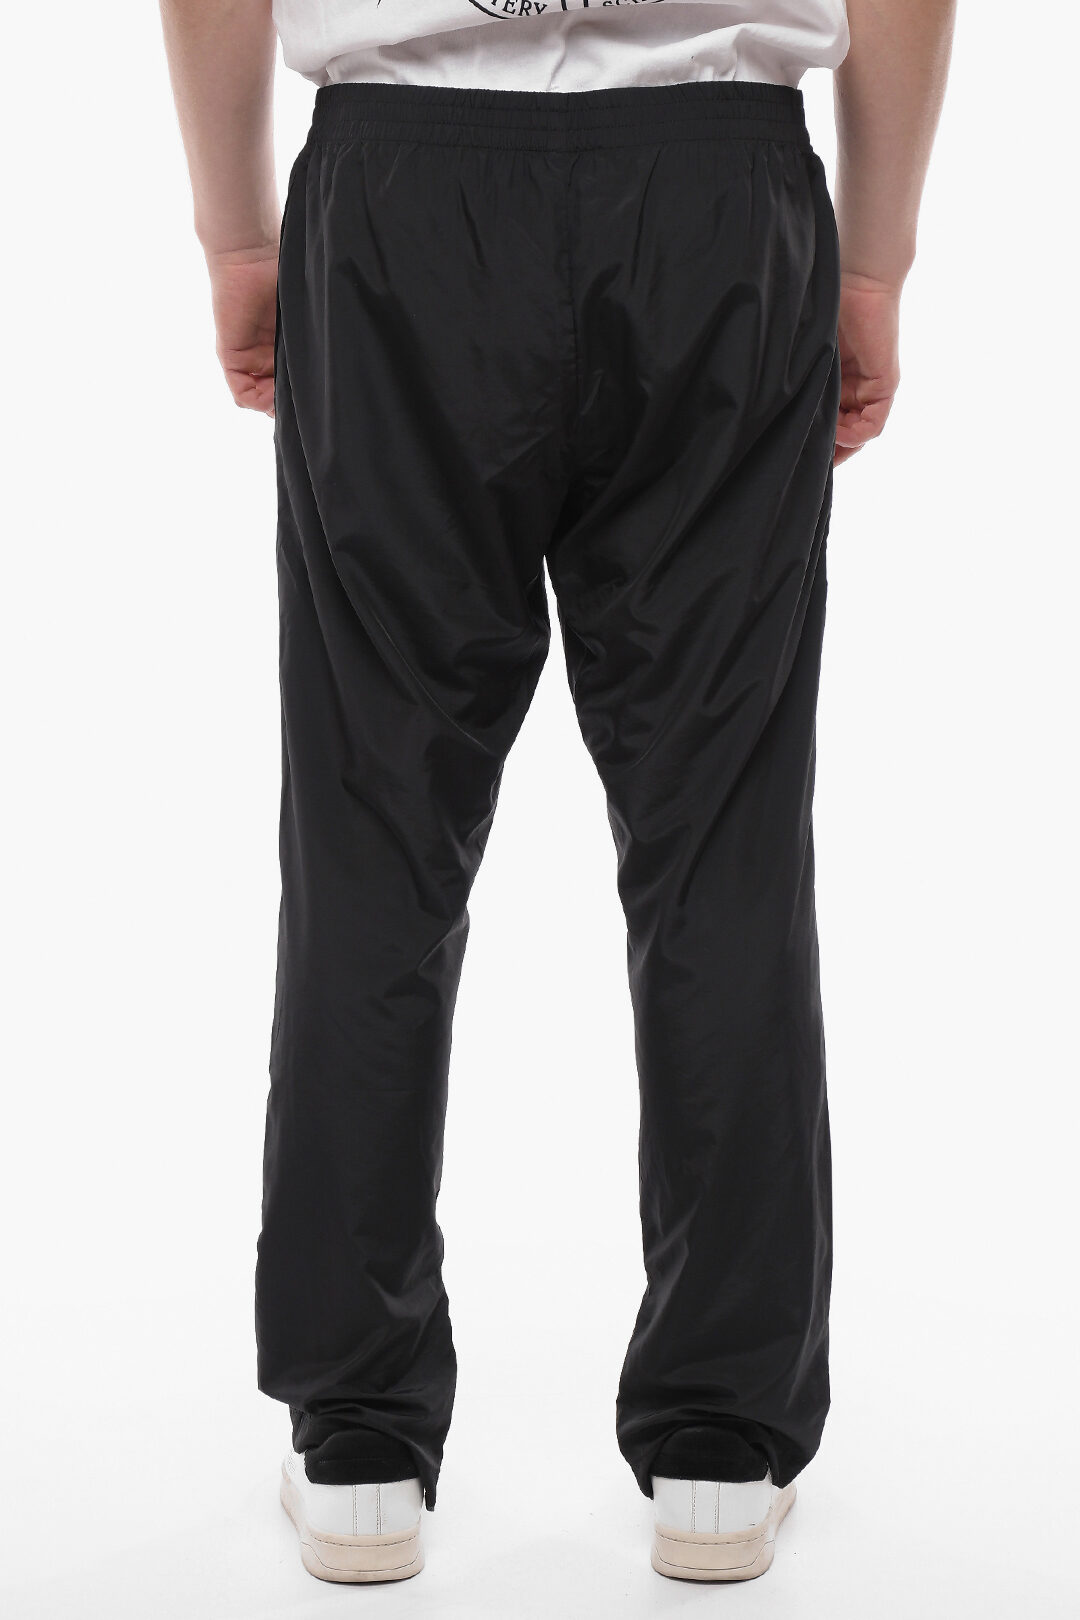 Buy Classic Silk Solid Track Pants for Men, Pack of 2 Online In India At  Discounted Prices